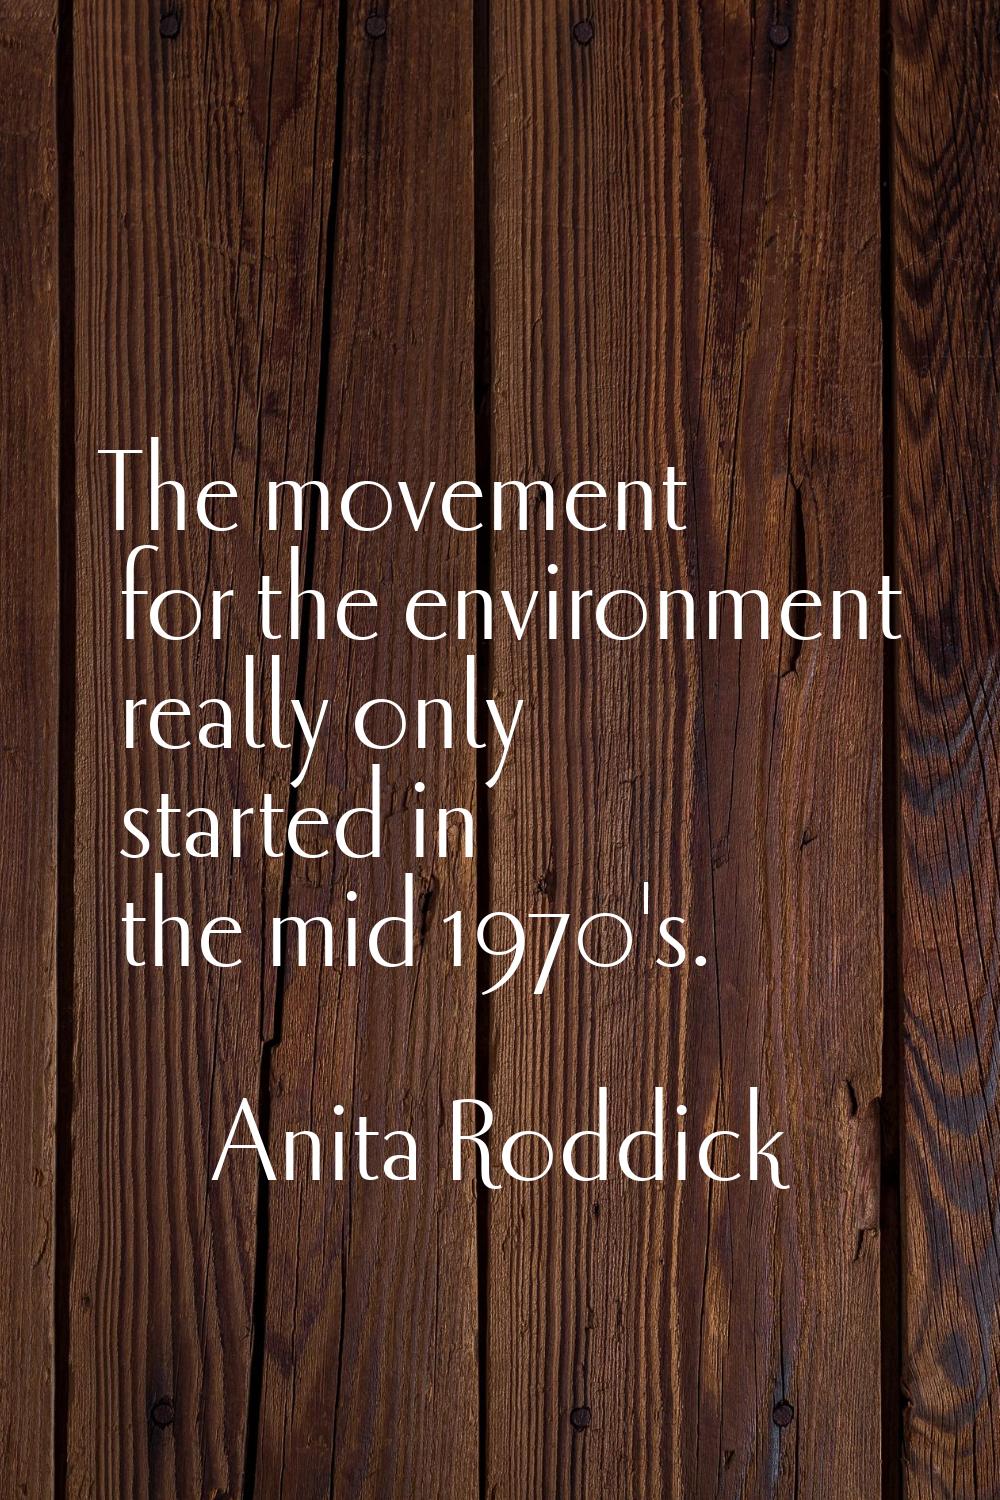 The movement for the environment really only started in the mid 1970's.